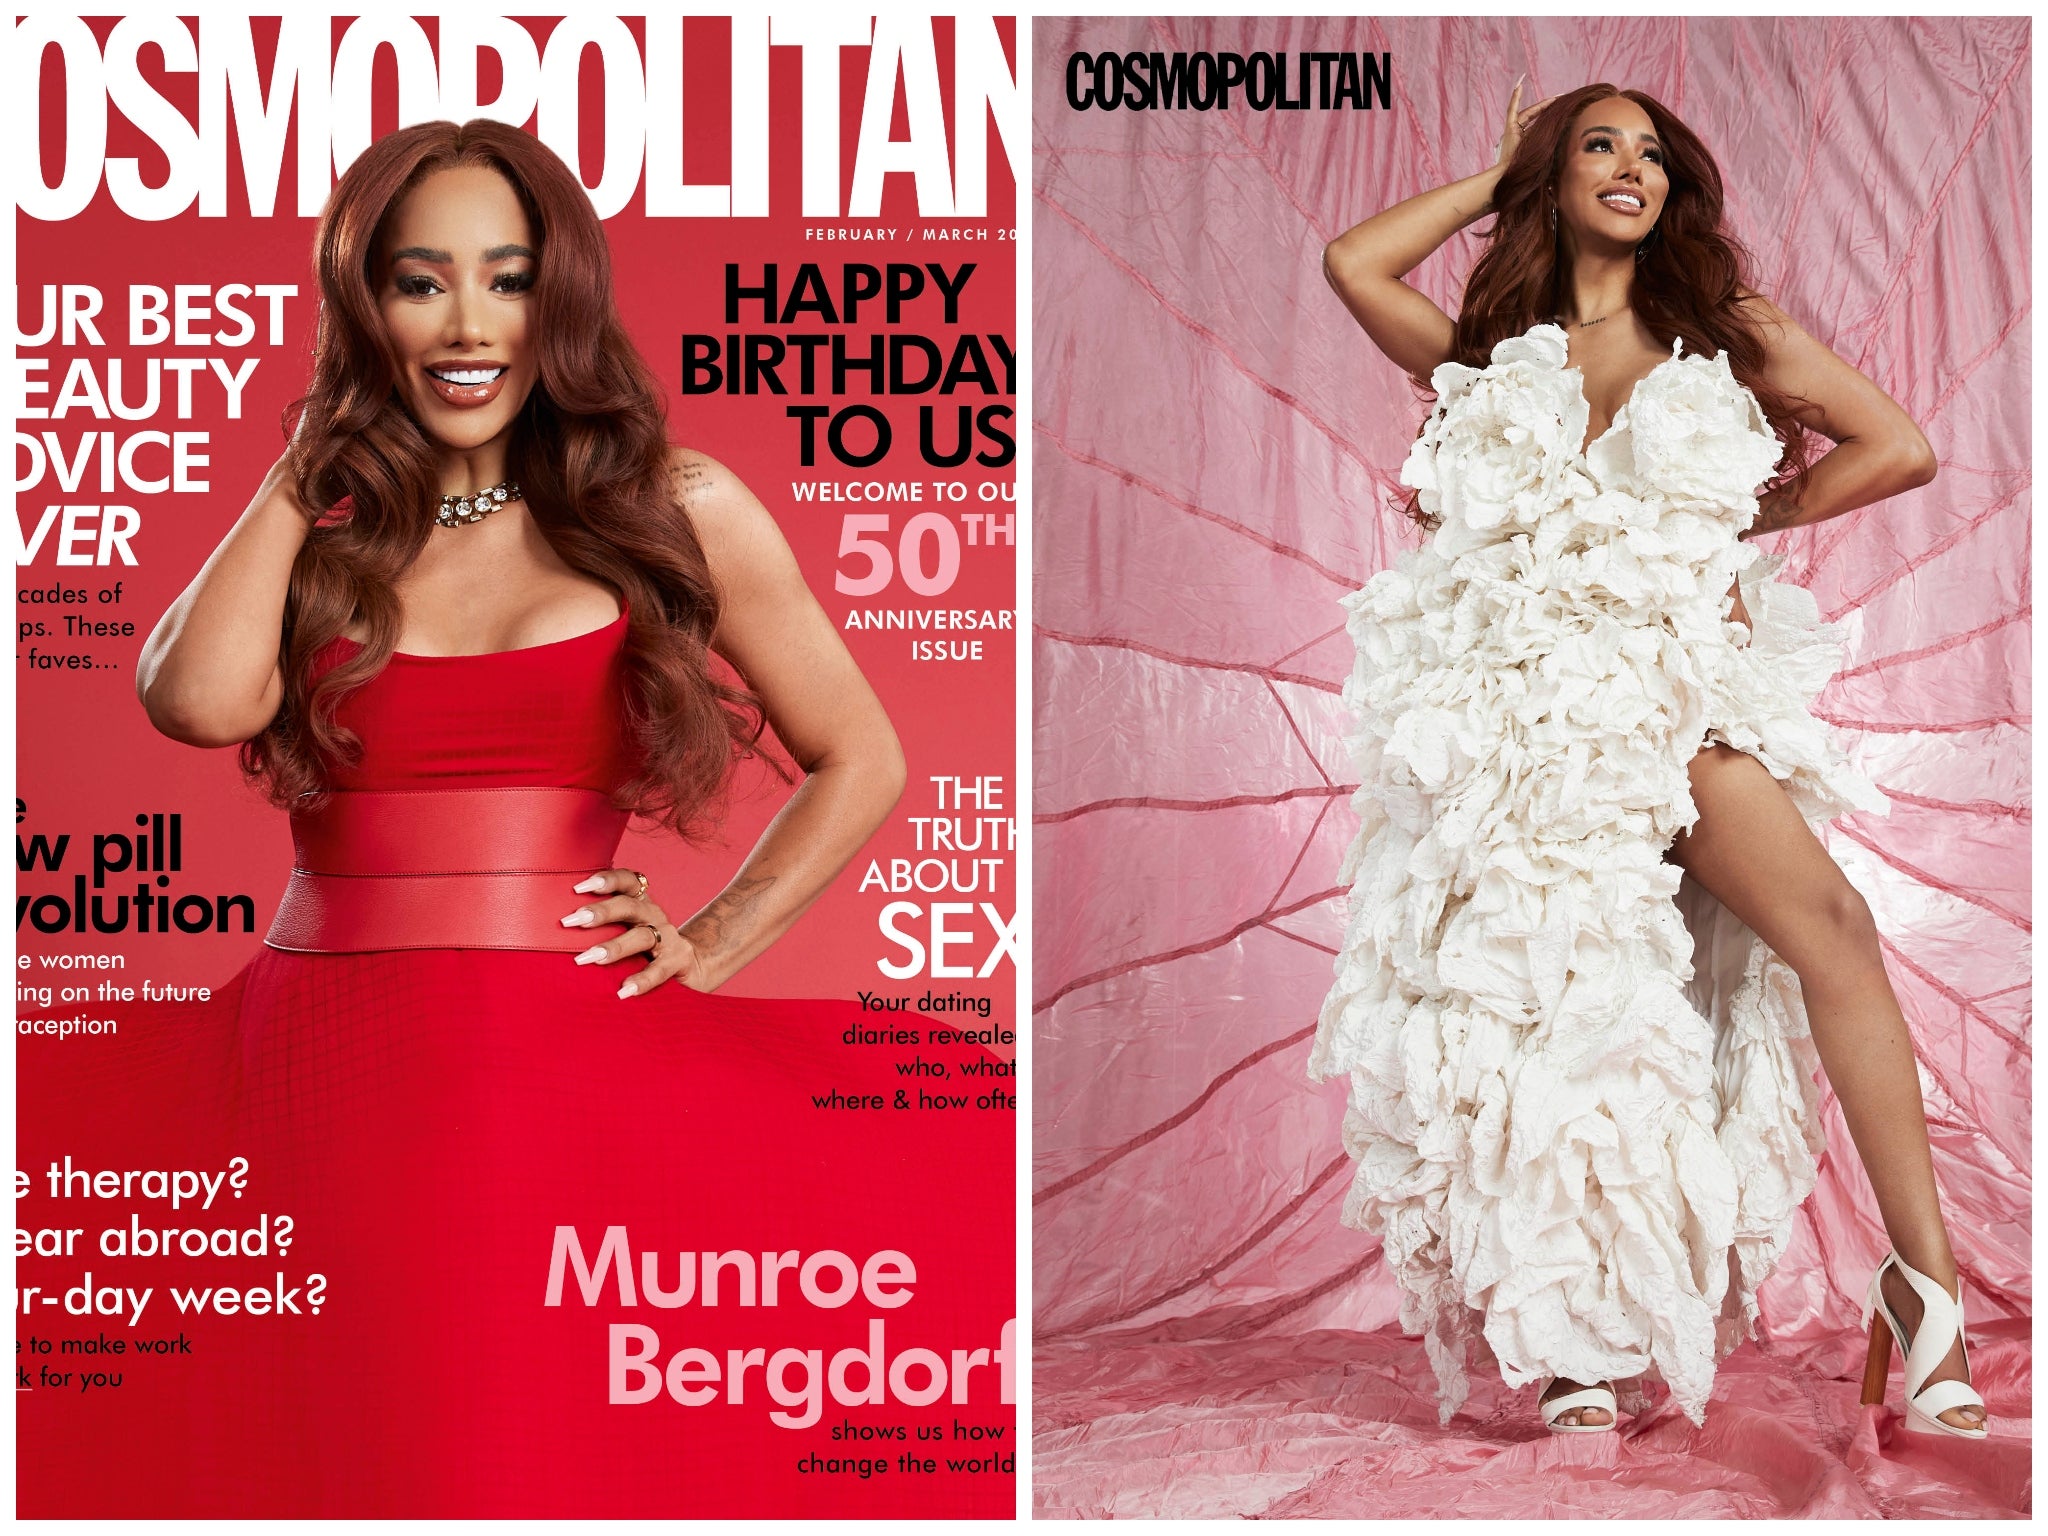 The 50th anniversary issue of Cosmopolitan UK is on sale from 21 January